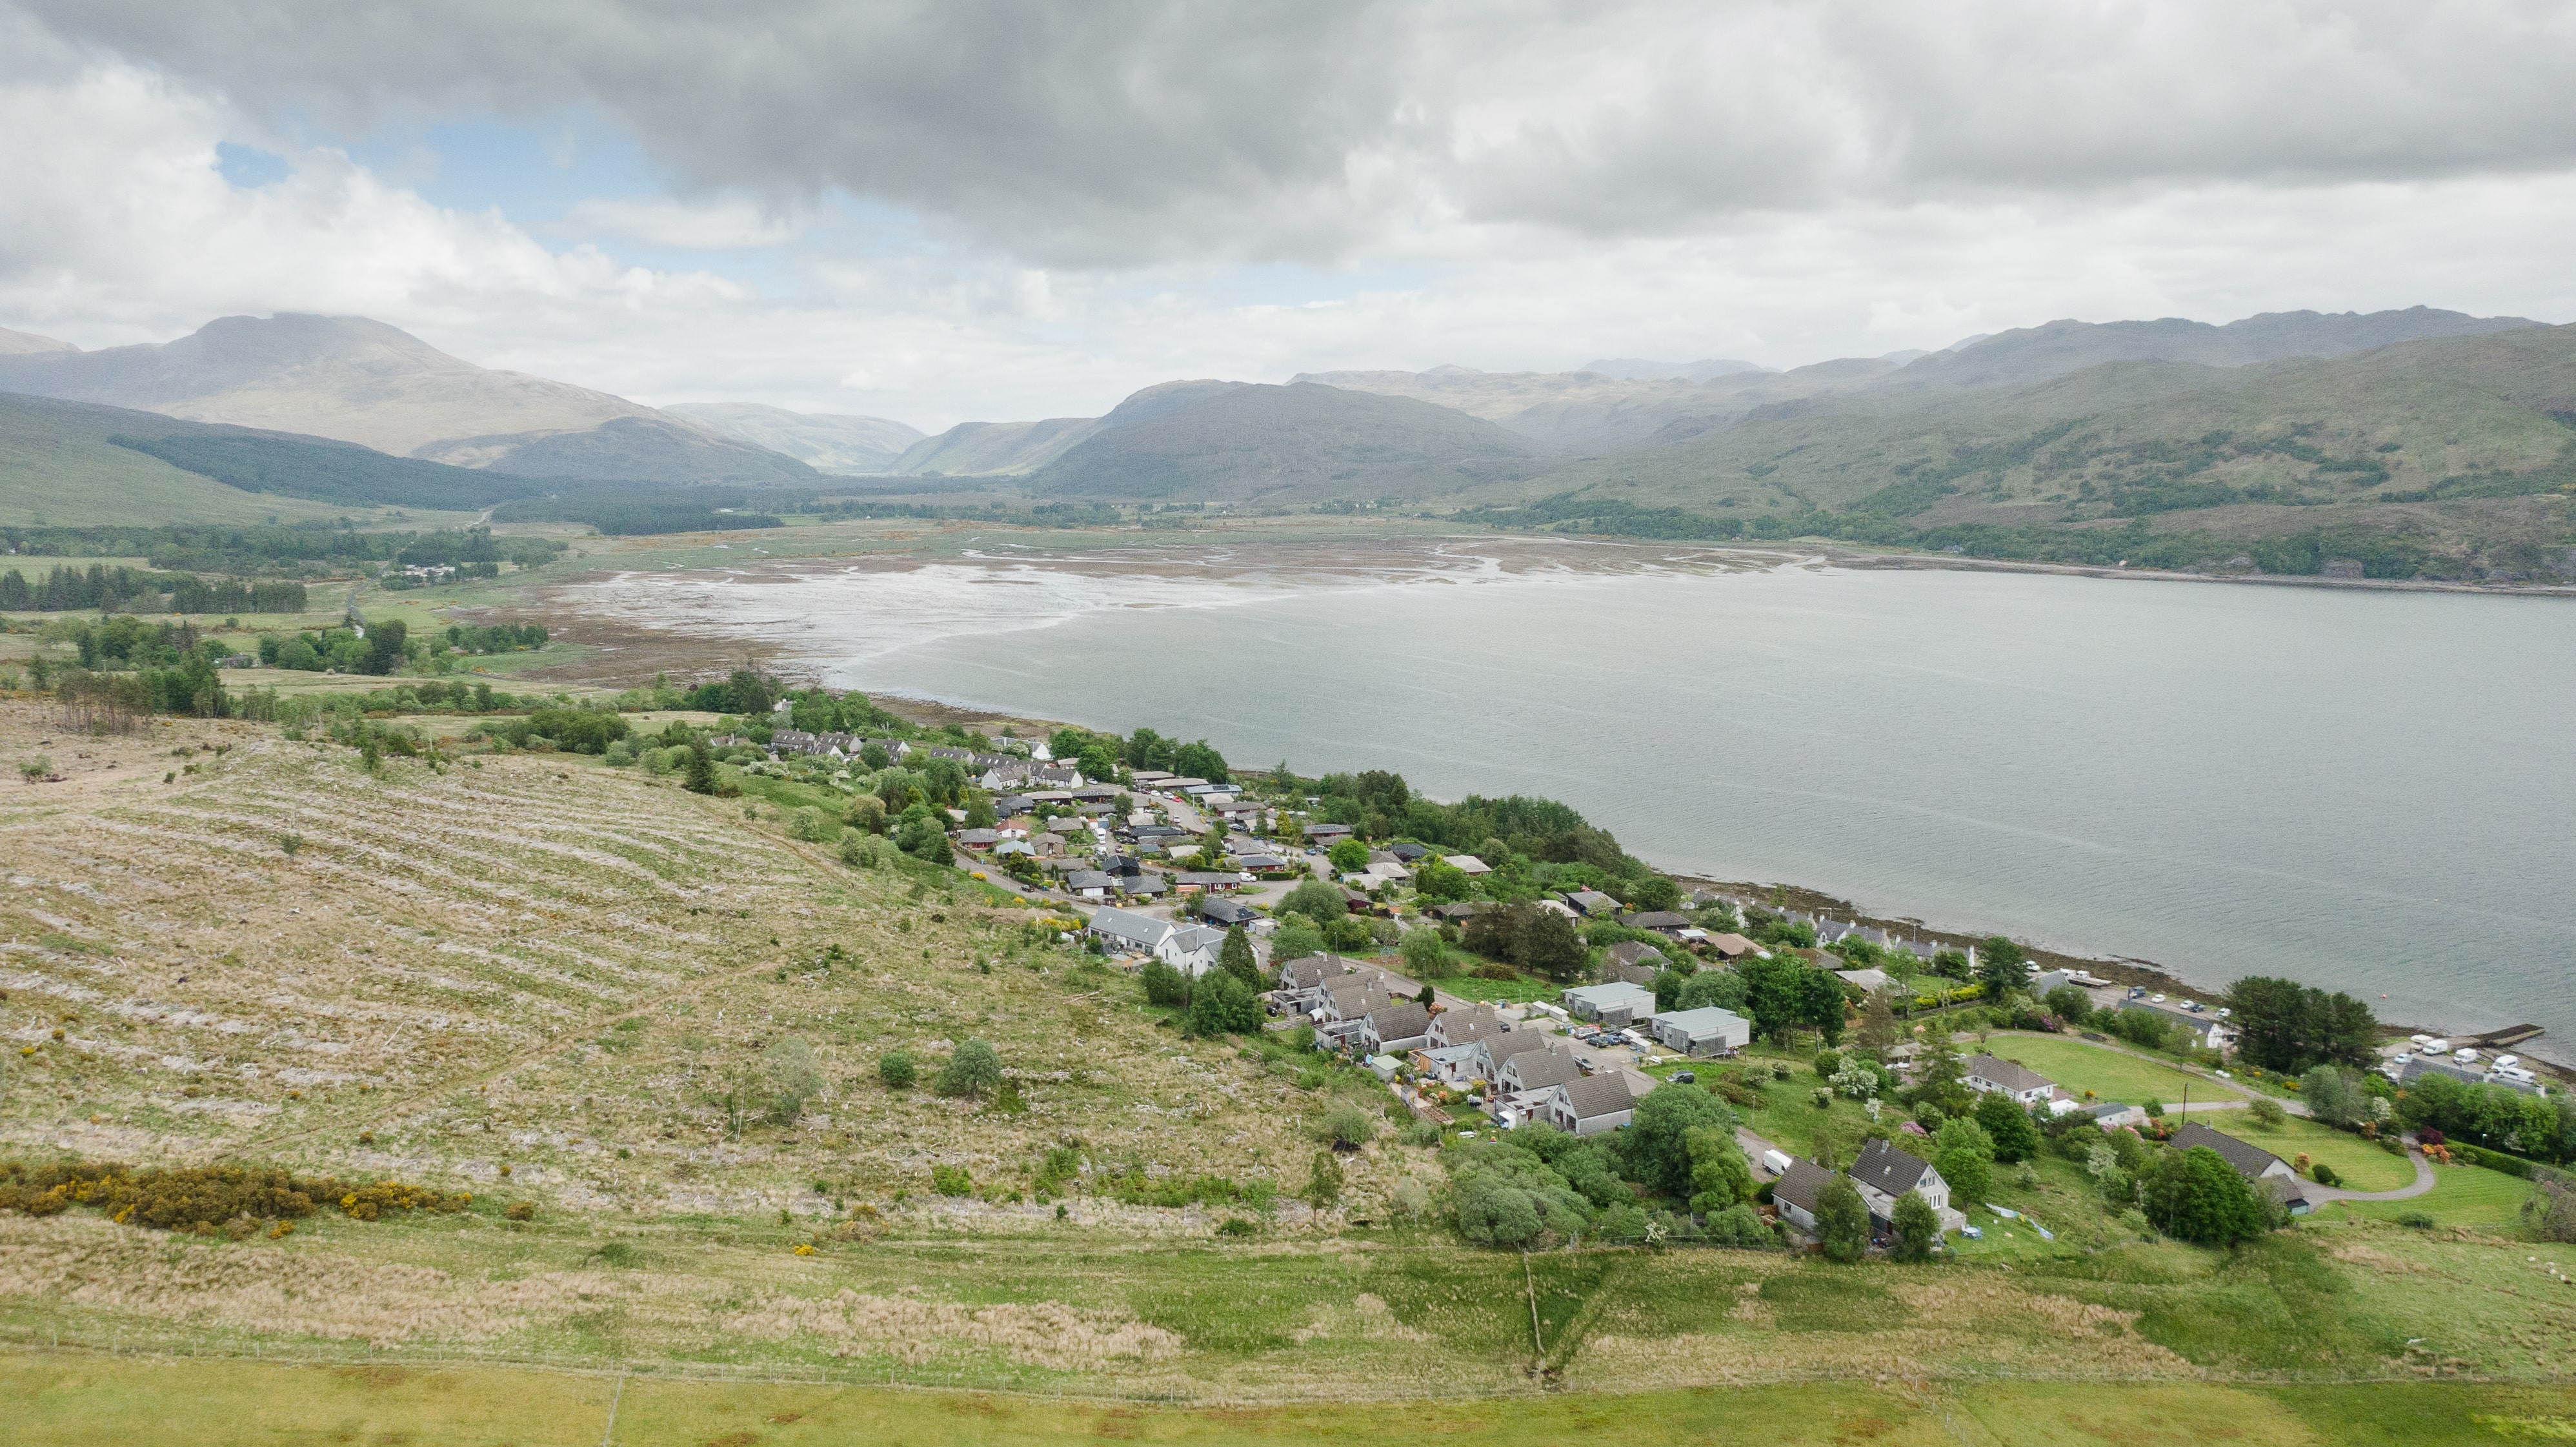 Community-led affordable homes given planning permission in Lochcarron